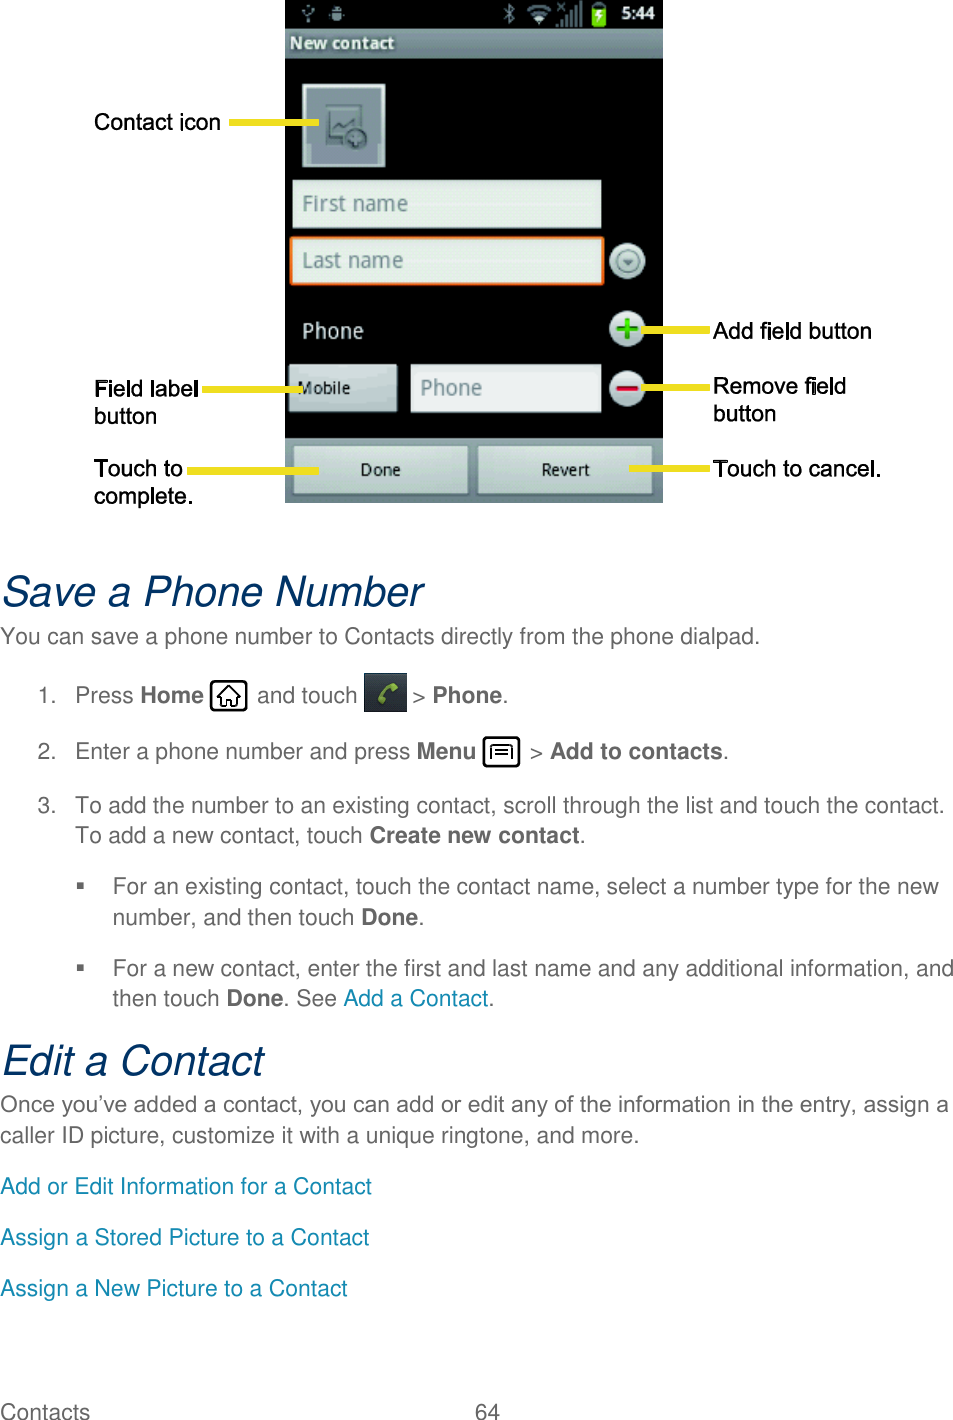 Contacts  64     Save a Phone Number You can save a phone number to Contacts directly from the phone dialpad. 1.  Press Home   and touch  &gt; Phone. 2.  Enter a phone number and press Menu   &gt; Add to contacts. 3.  To add the number to an existing contact, scroll through the list and touch the contact. To add a new contact, touch Create new contact.   For an existing contact, touch the contact name, select a number type for the new number, and then touch Done.   For a new contact, enter the first and last name and any additional information, and then touch Done. See Add a Contact. Edit a Contact Once you’ve added a contact, you can add or edit any of the information in the entry, assign a caller ID picture, customize it with a unique ringtone, and more. Add or Edit Information for a Contact Assign a Stored Picture to a Contact Assign a New Picture to a Contact 